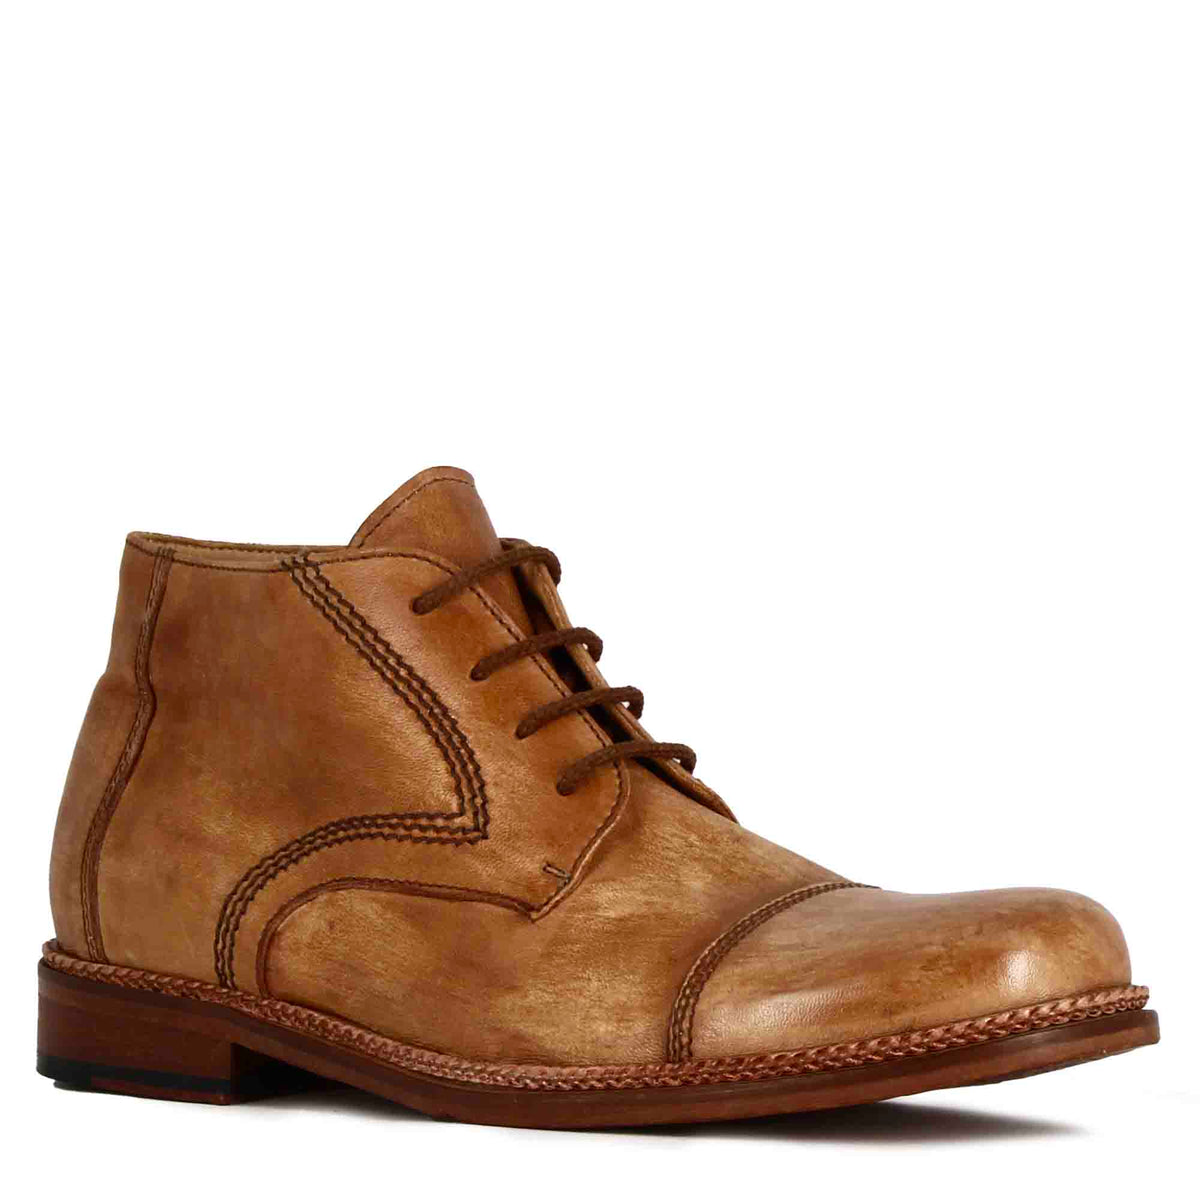 Men's lace-up ankle boots in beige leather